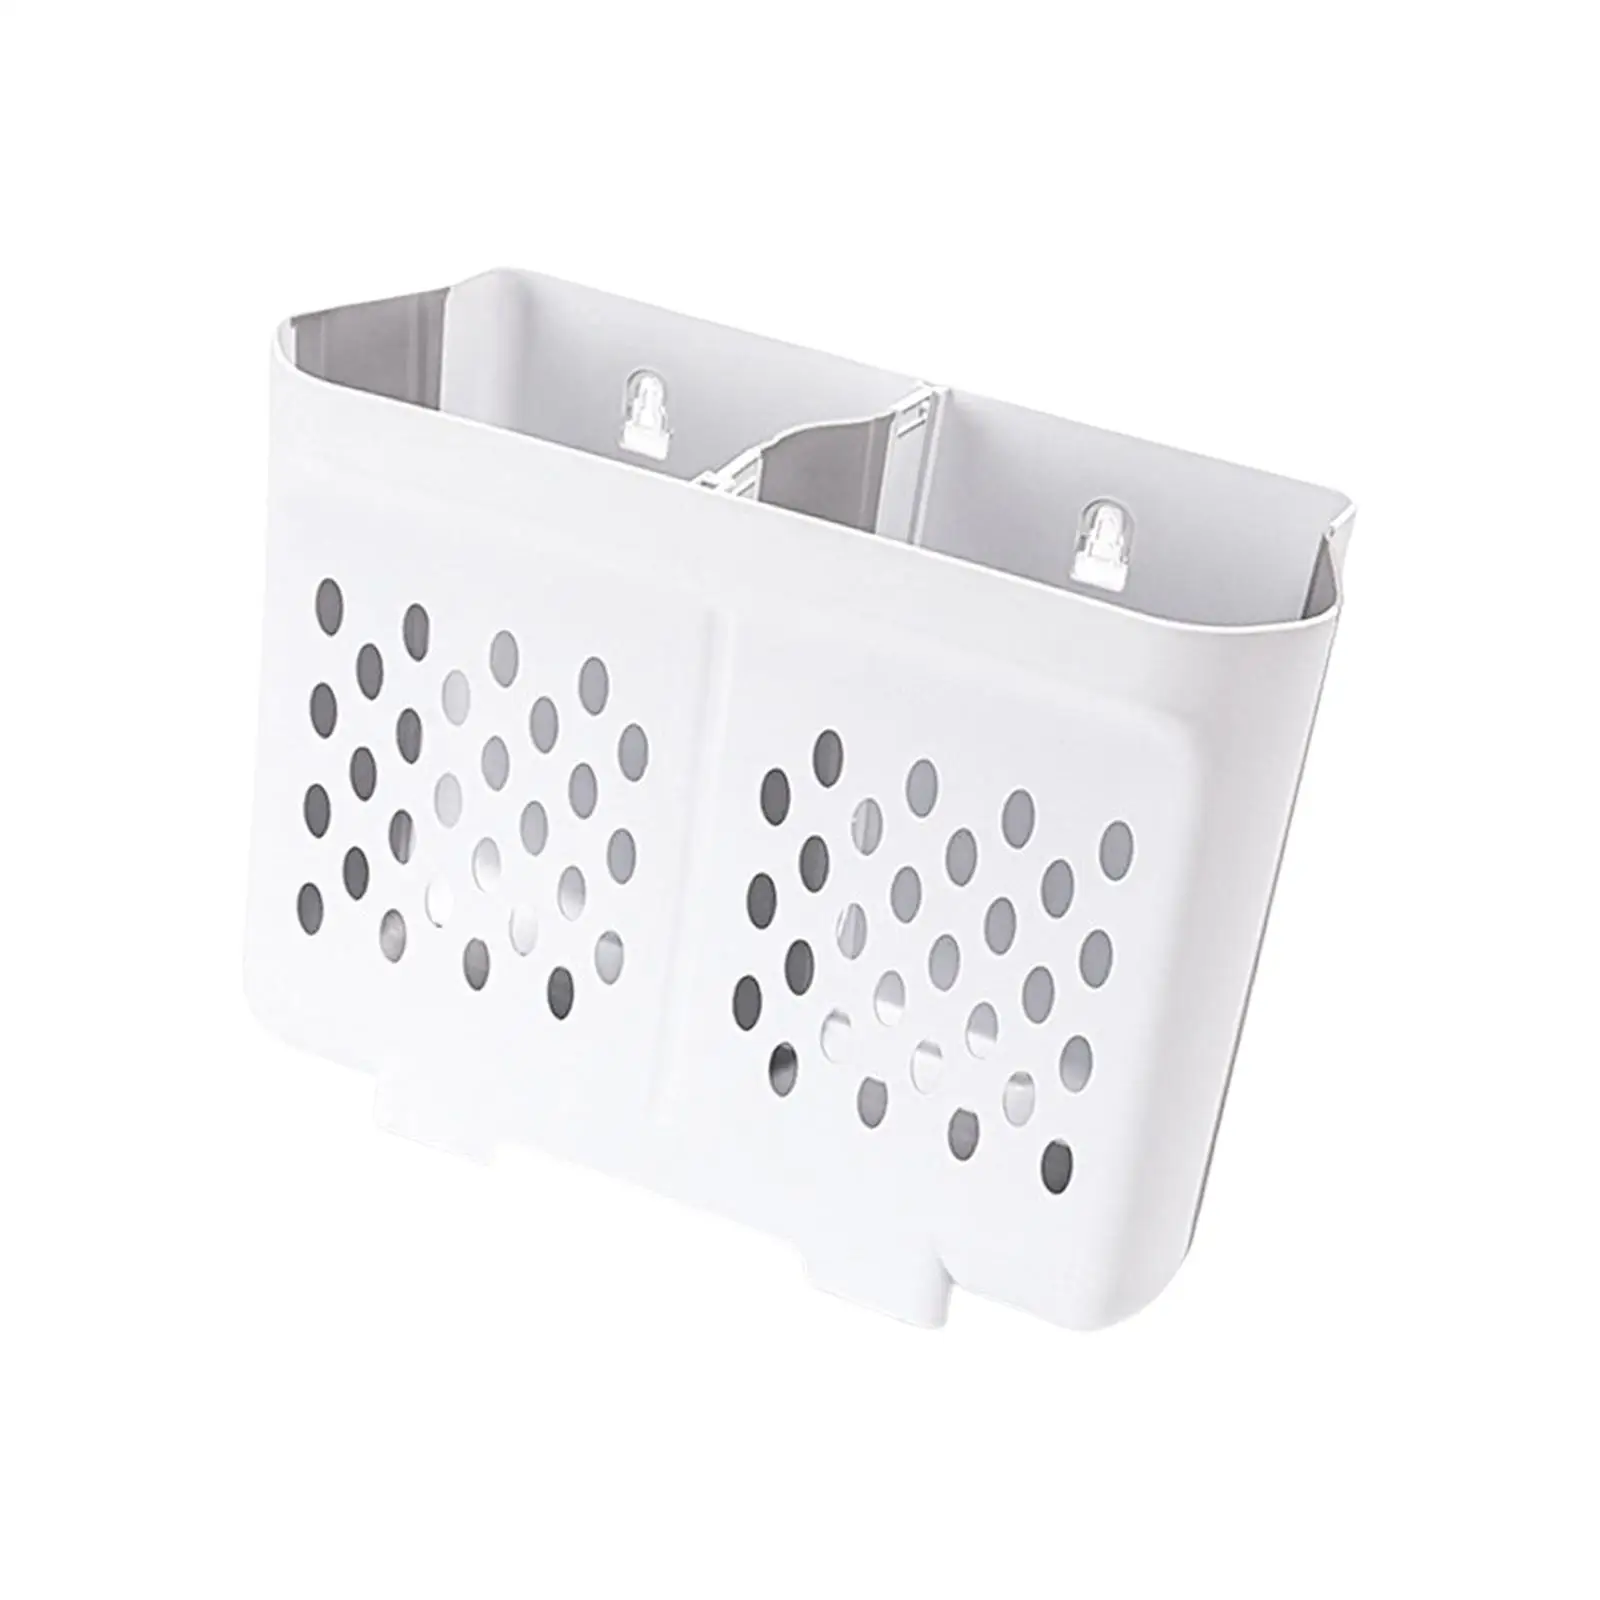 Portable Collapsible Laundry Storage Basket Wall Mounted Space Saving Convenient Accessory for Organizing Home, Clothes, Towels